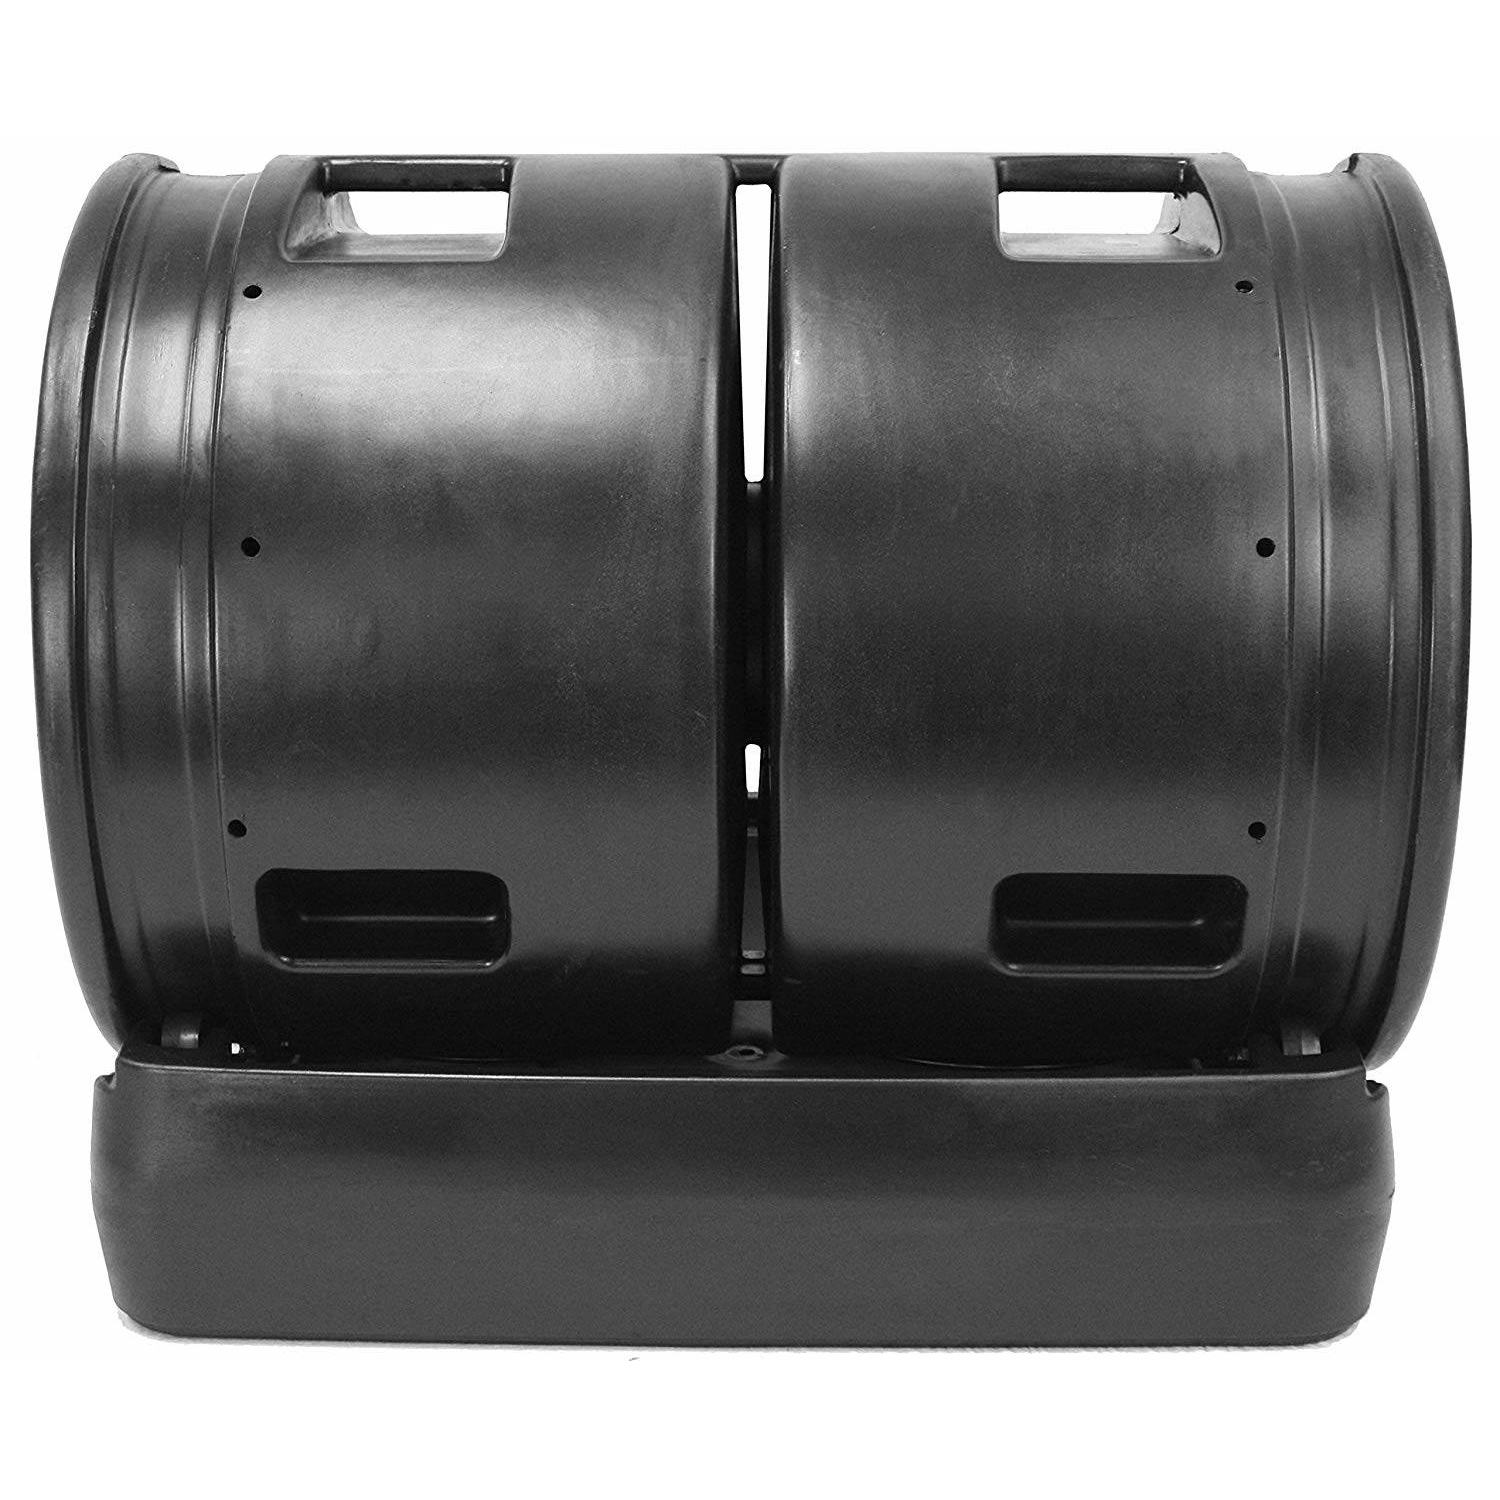 Good Ideas Compost Wizard Outdoor Dual Tumbler Compost Container, Black - image 3 of 10